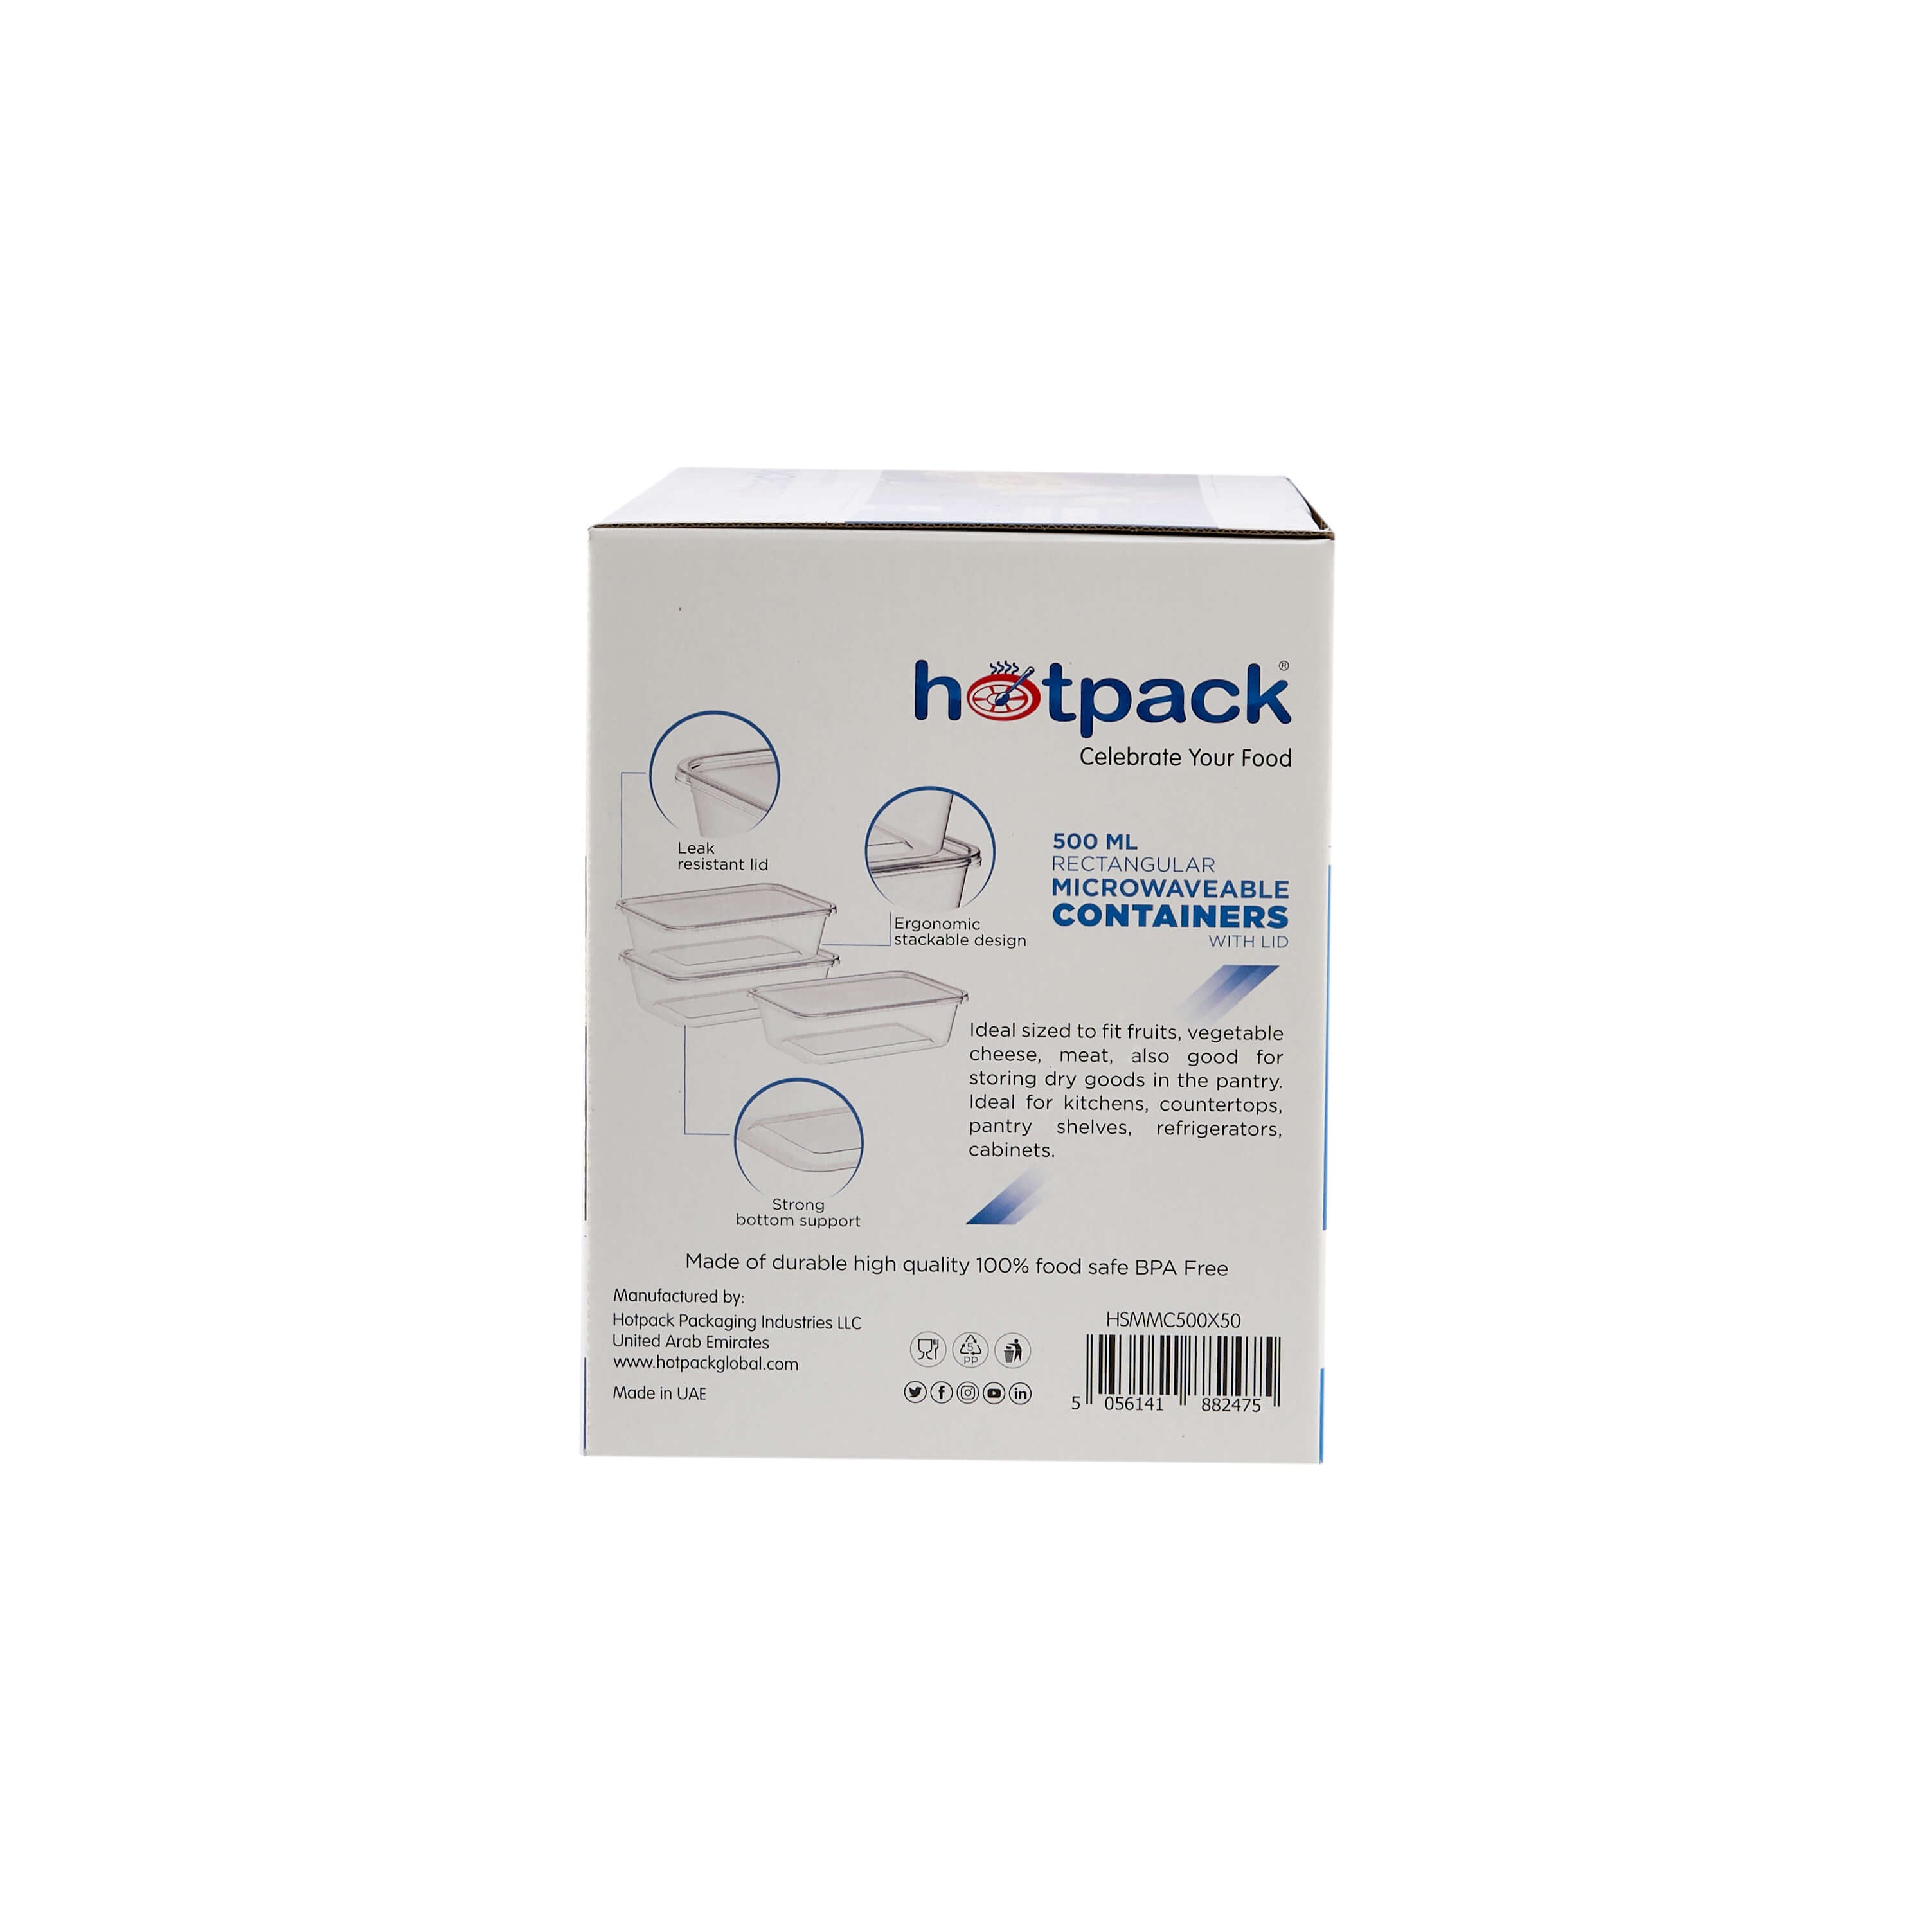 Microwave-safe food containers - Hotpack Global